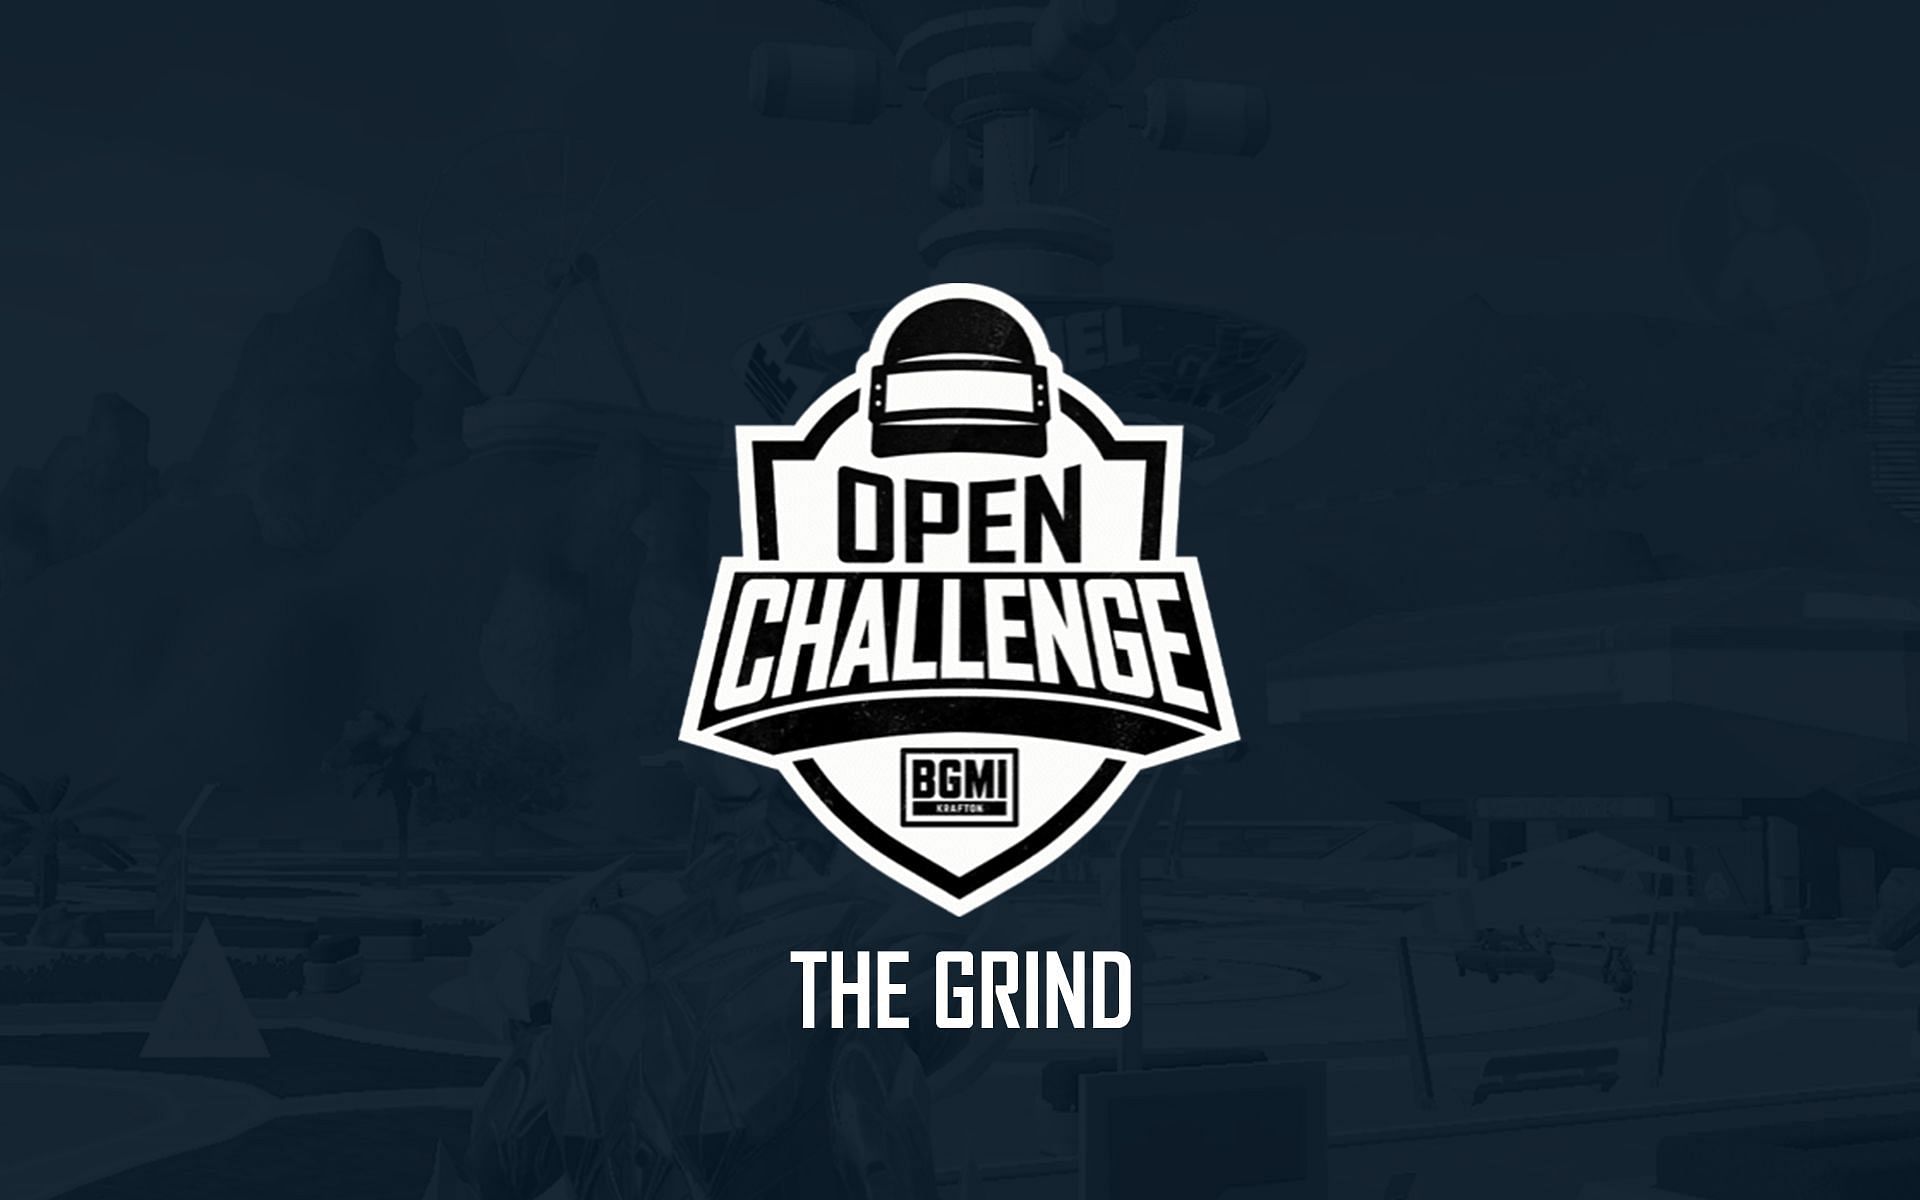 Learning all about the upcoming BGMI esports tournament - BMOC The Grind (Image via Sportskeeda)